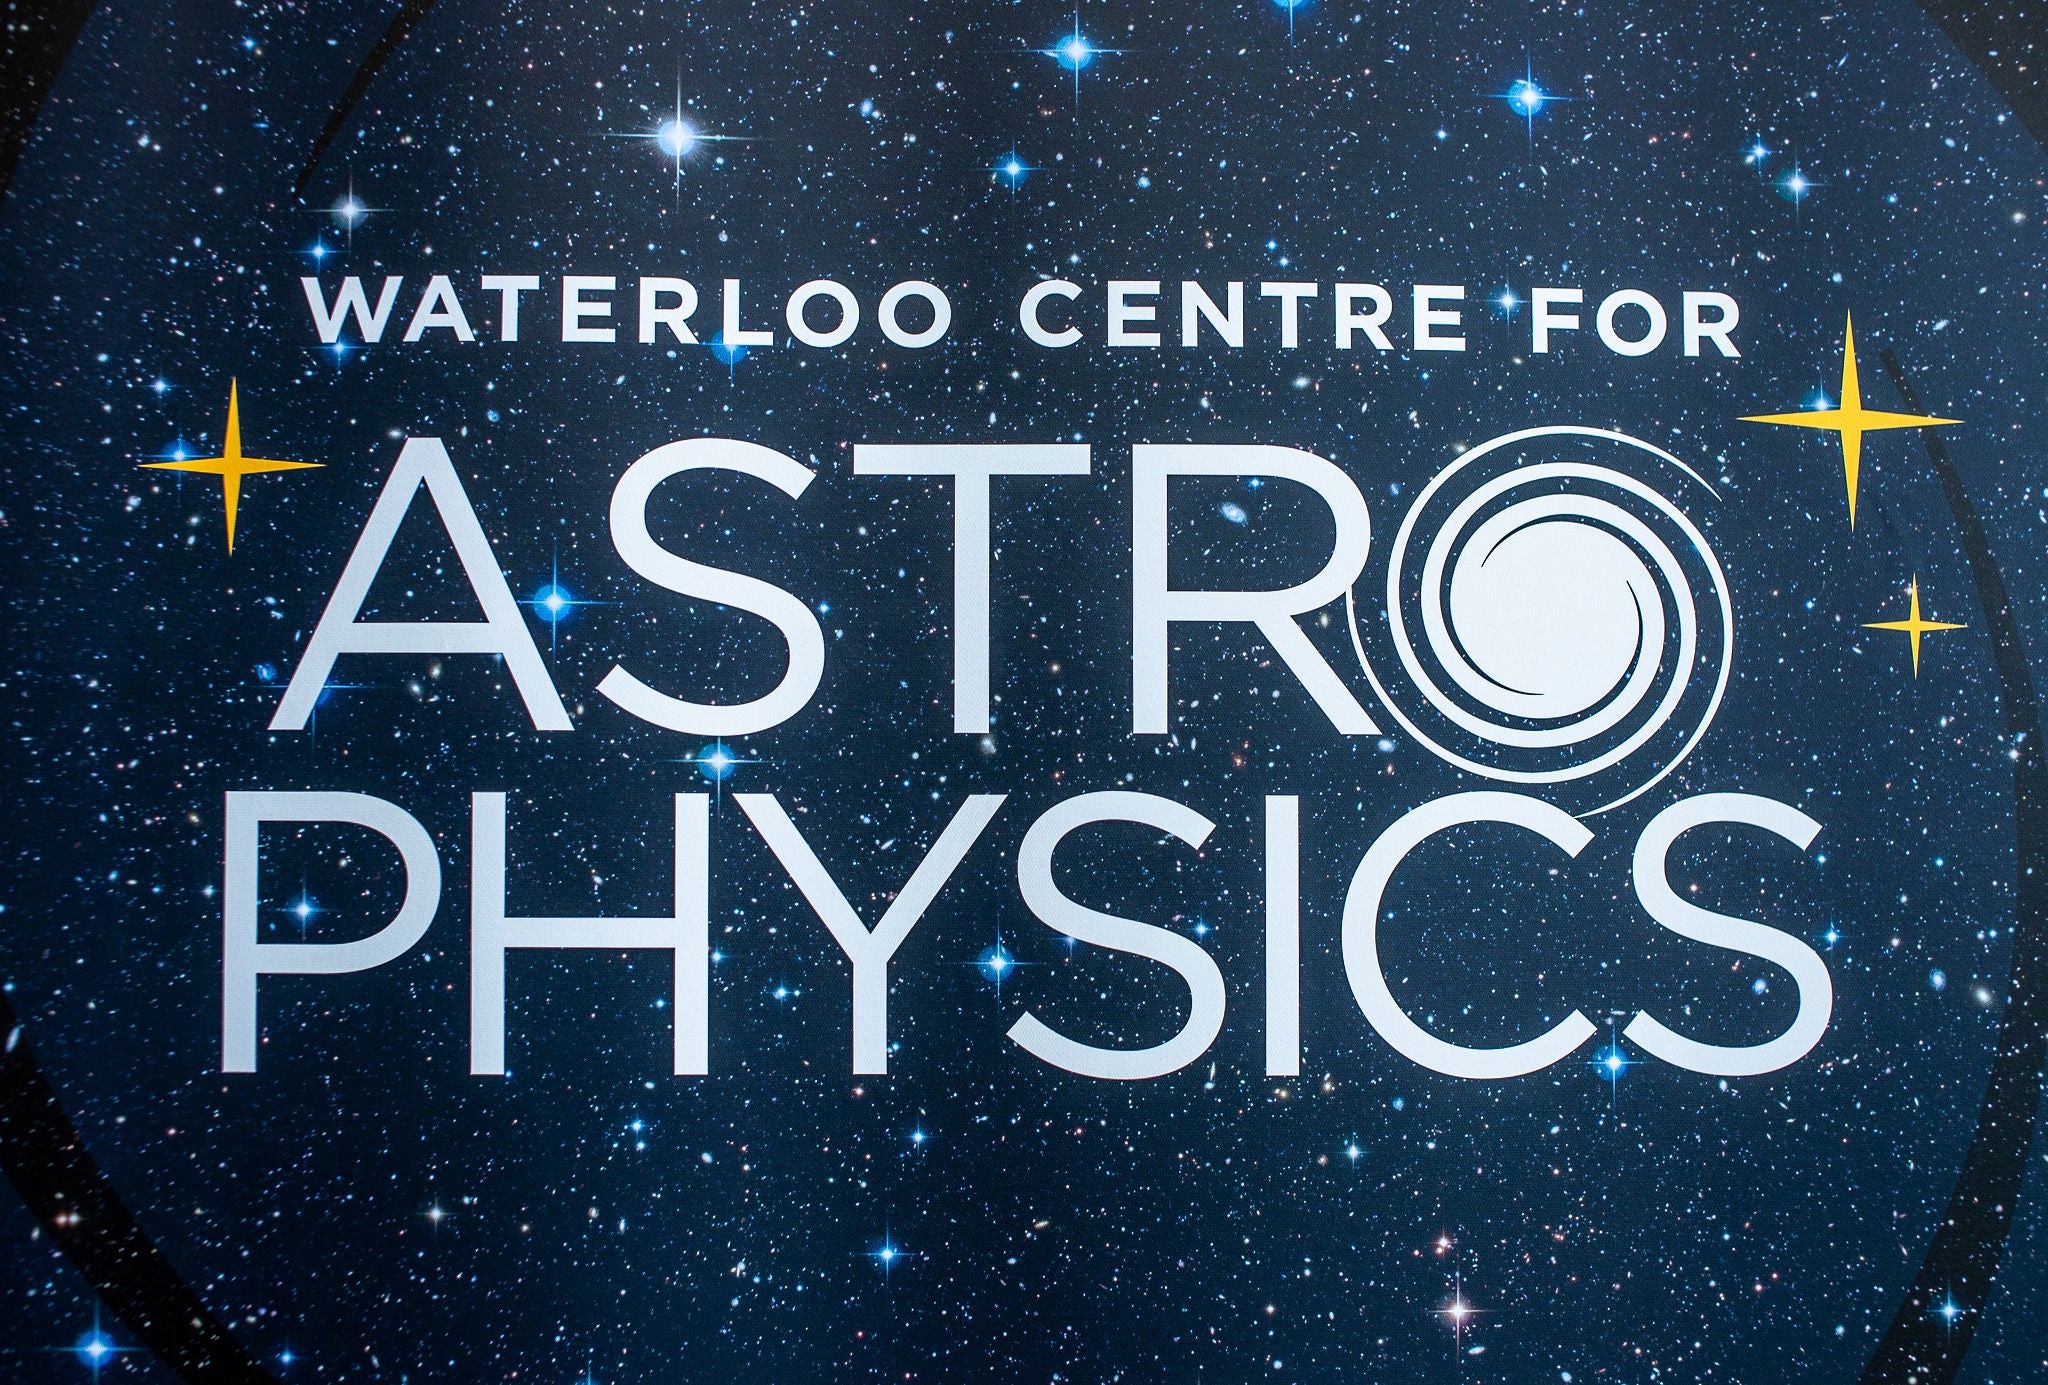 Waterloo Centre for Astrophysics